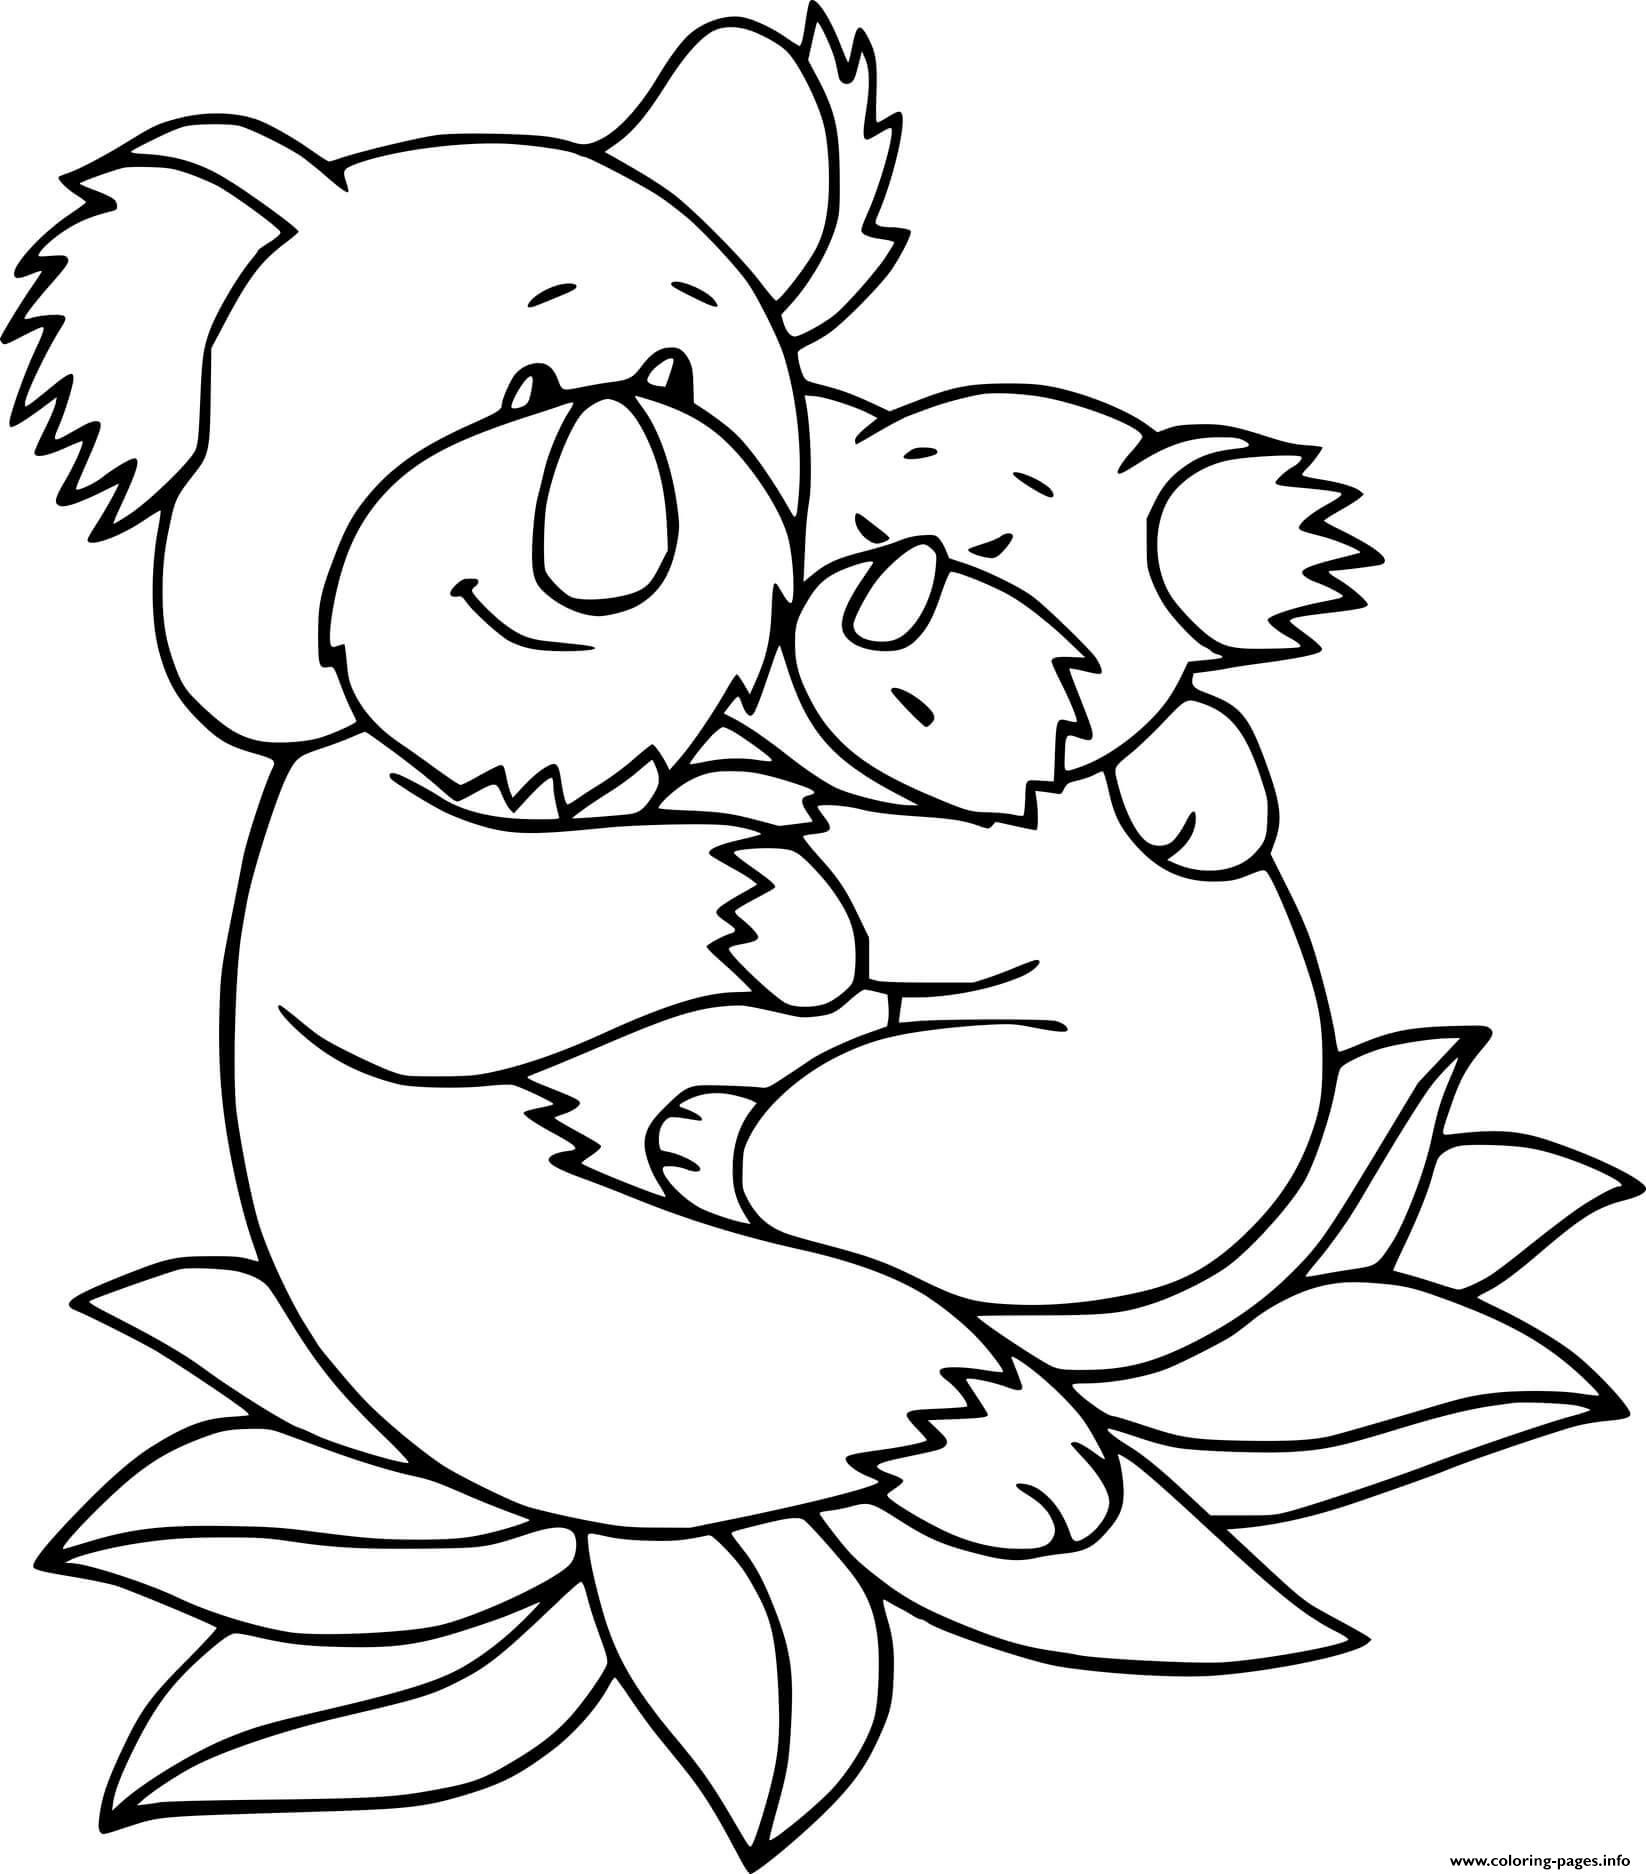 Koala And Baby Sit On The Leaves coloring